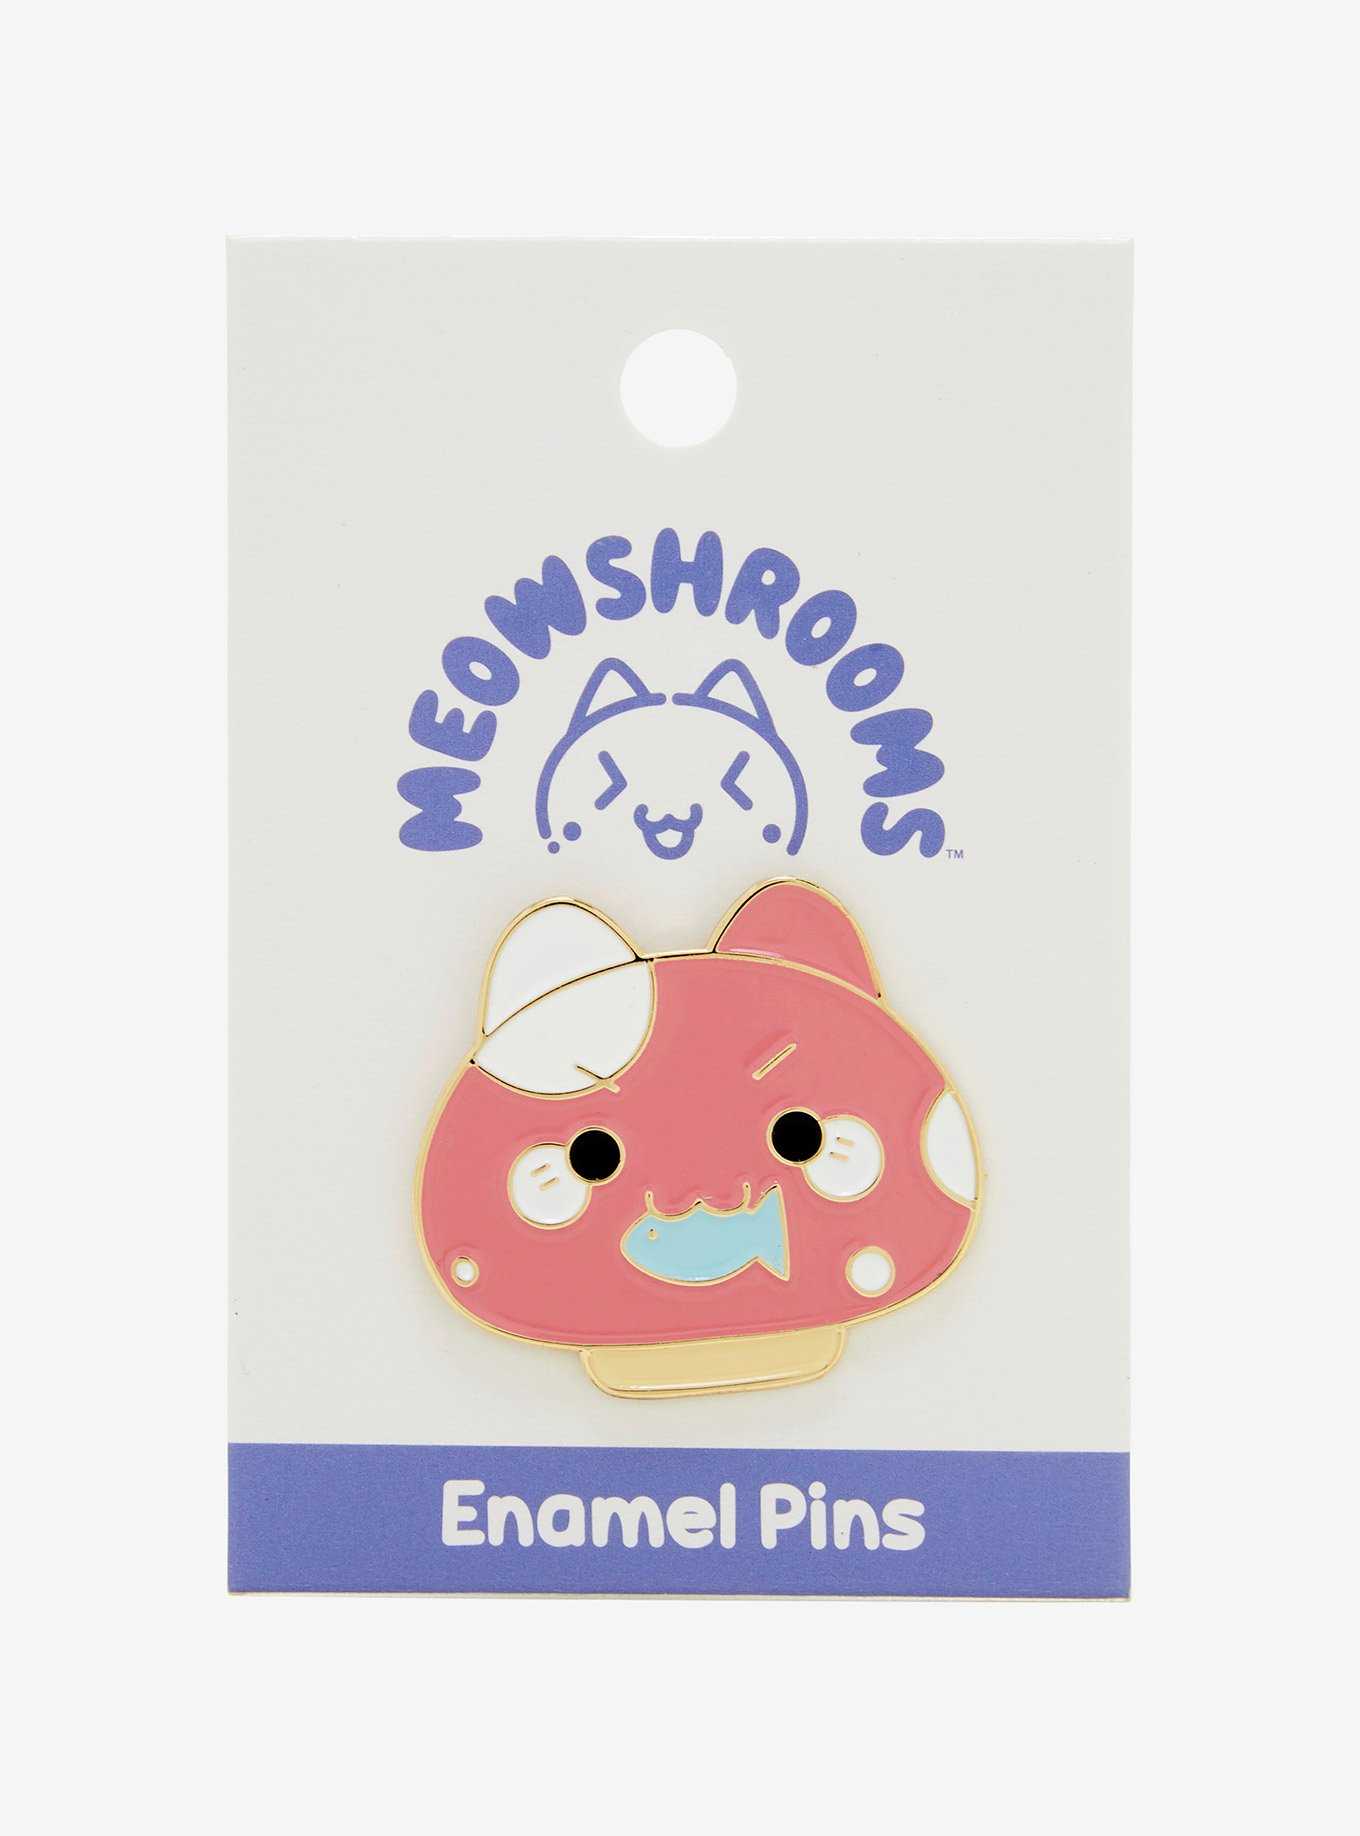 Meowshrooms Pink Enamel Pin — BoxLunch Exclusive, , hi-res